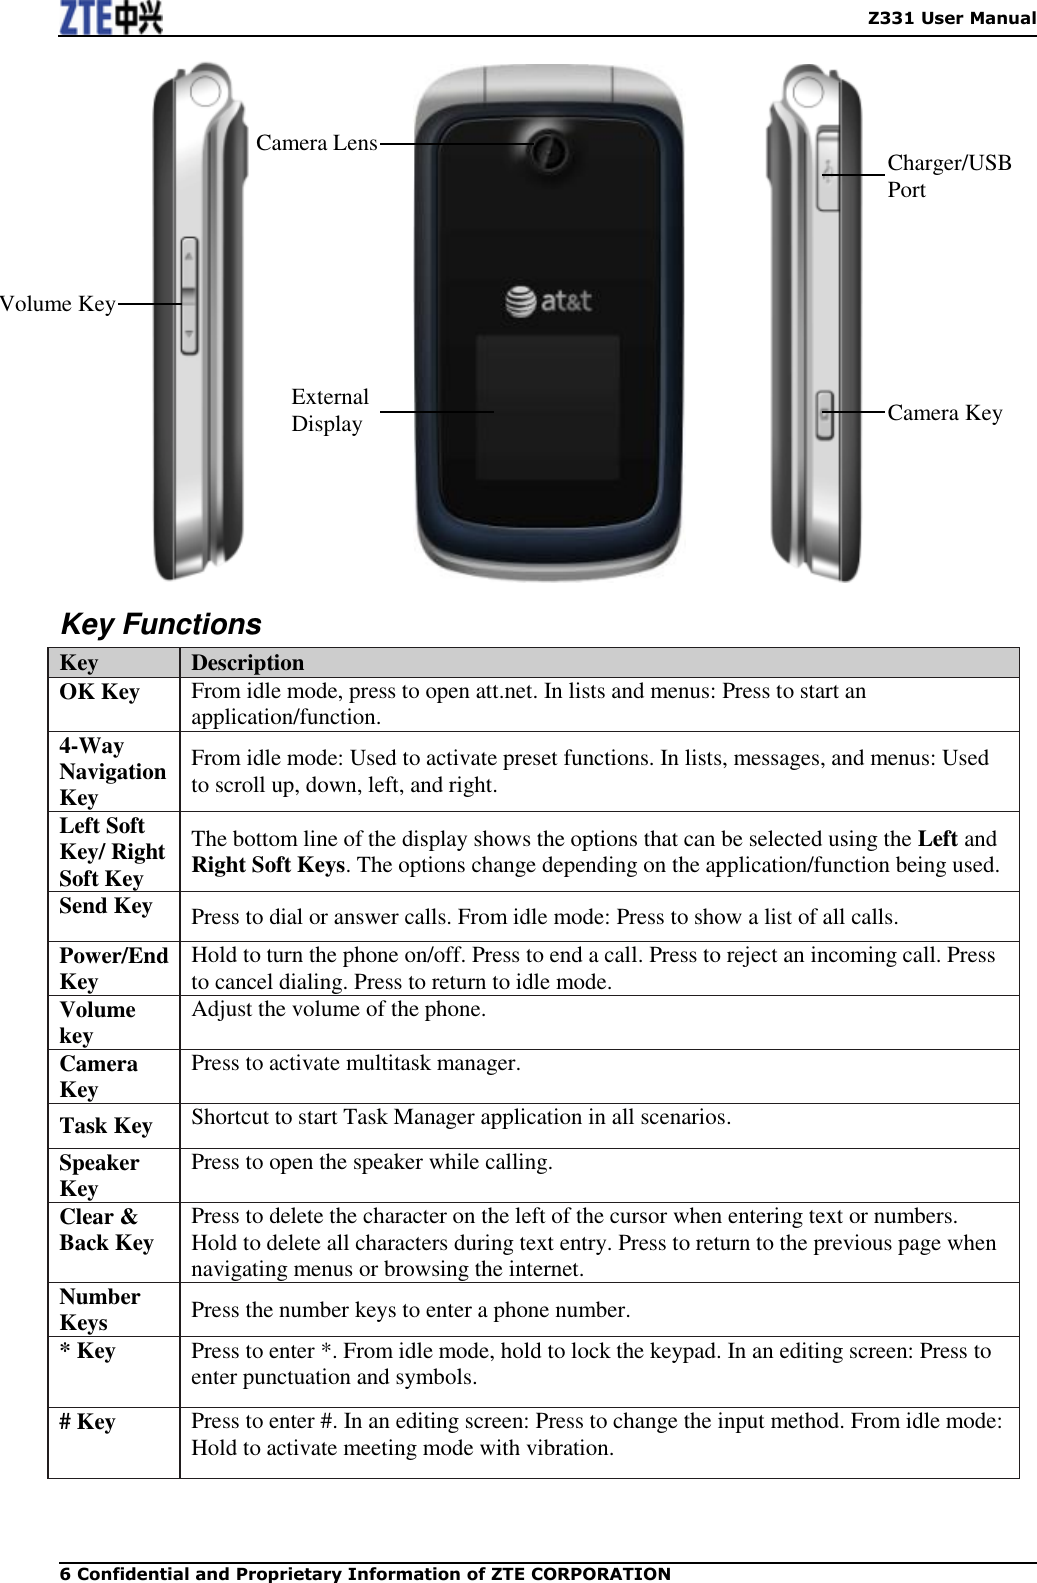    Z331 User Manual 6 Confidential and Proprietary Information of ZTE CORPORATION Camera Key Volume Key Camera Lens External Display Charger/USB Port                       Key Functions Key   Description   OK Key   From idle mode, press to open att.net. In lists and menus: Press to start an application/function. 4-Way Navigation Key   From idle mode: Used to activate preset functions. In lists, messages, and menus: Used to scroll up, down, left, and right.   Left Soft Key/ Right Soft Key   The bottom line of the display shows the options that can be selected using the Left and Right Soft Keys. The options change depending on the application/function being used.   Send Key   Press to dial or answer calls. From idle mode: Press to show a list of all calls.   Power/End Key   Hold to turn the phone on/off. Press to end a call. Press to reject an incoming call. Press to cancel dialing. Press to return to idle mode. Volume key Adjust the volume of the phone. Camera Key   Press to activate multitask manager.   Task Key Shortcut to start Task Manager application in all scenarios. Speaker Key Press to open the speaker while calling. Clear &amp; Back Key   Press to delete the character on the left of the cursor when entering text or numbers. Hold to delete all characters during text entry. Press to return to the previous page when navigating menus or browsing the internet. Number Keys   Press the number keys to enter a phone number.   * Key   Press to enter *. From idle mode, hold to lock the keypad. In an editing screen: Press to enter punctuation and symbols.   # Key   Press to enter #. In an editing screen: Press to change the input method. From idle mode: Hold to activate meeting mode with vibration.    